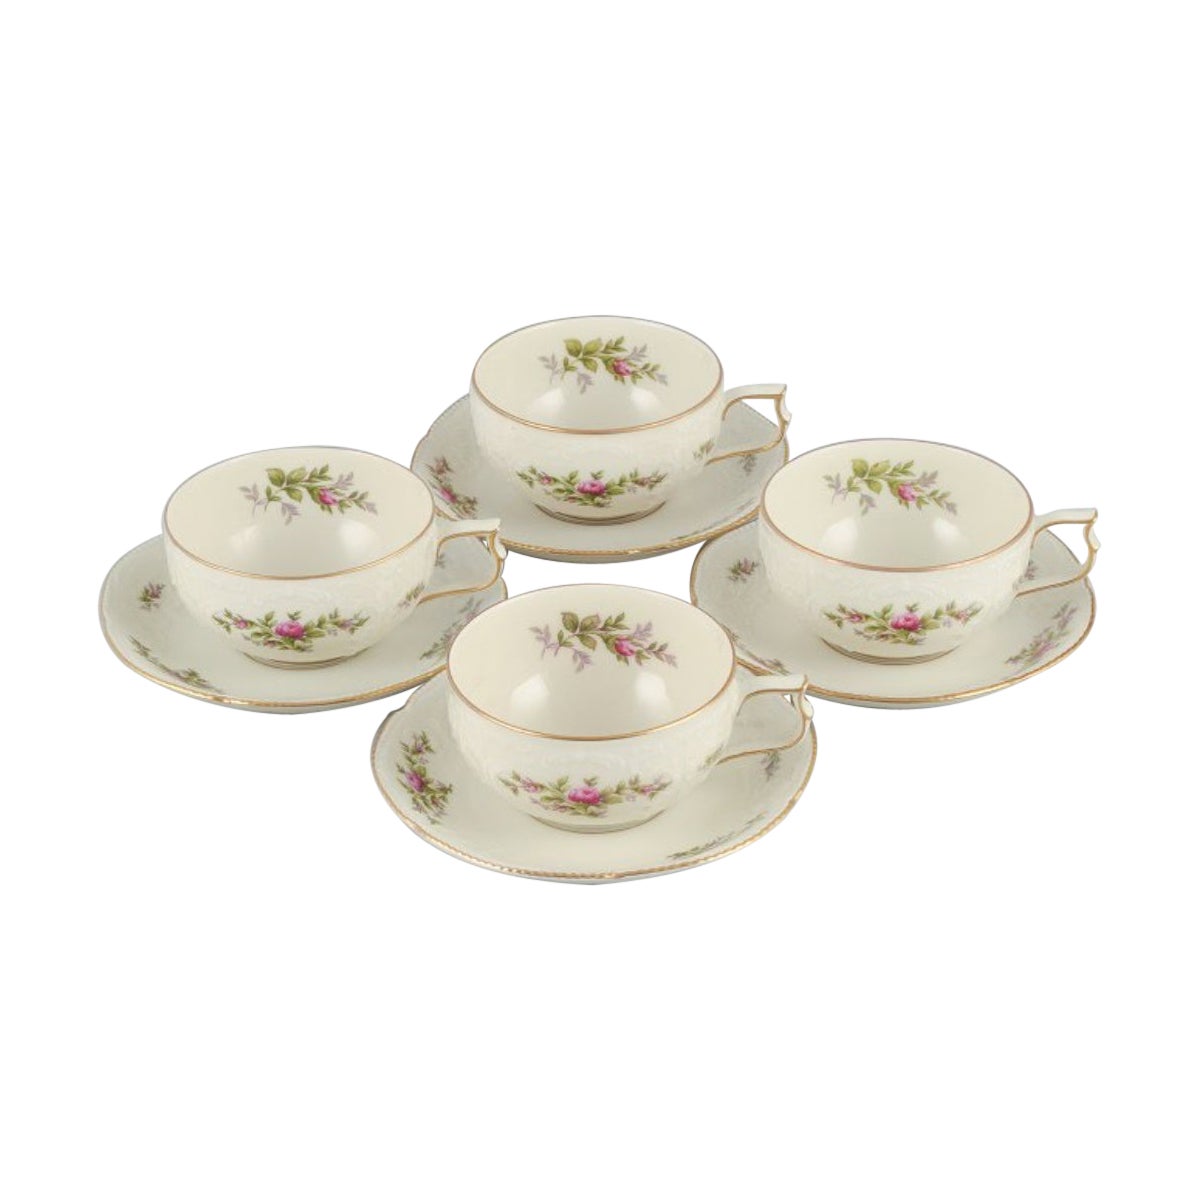 Rosenthal, Germany. "Sanssouci", Four Cream-Colored Teacups with Saucers